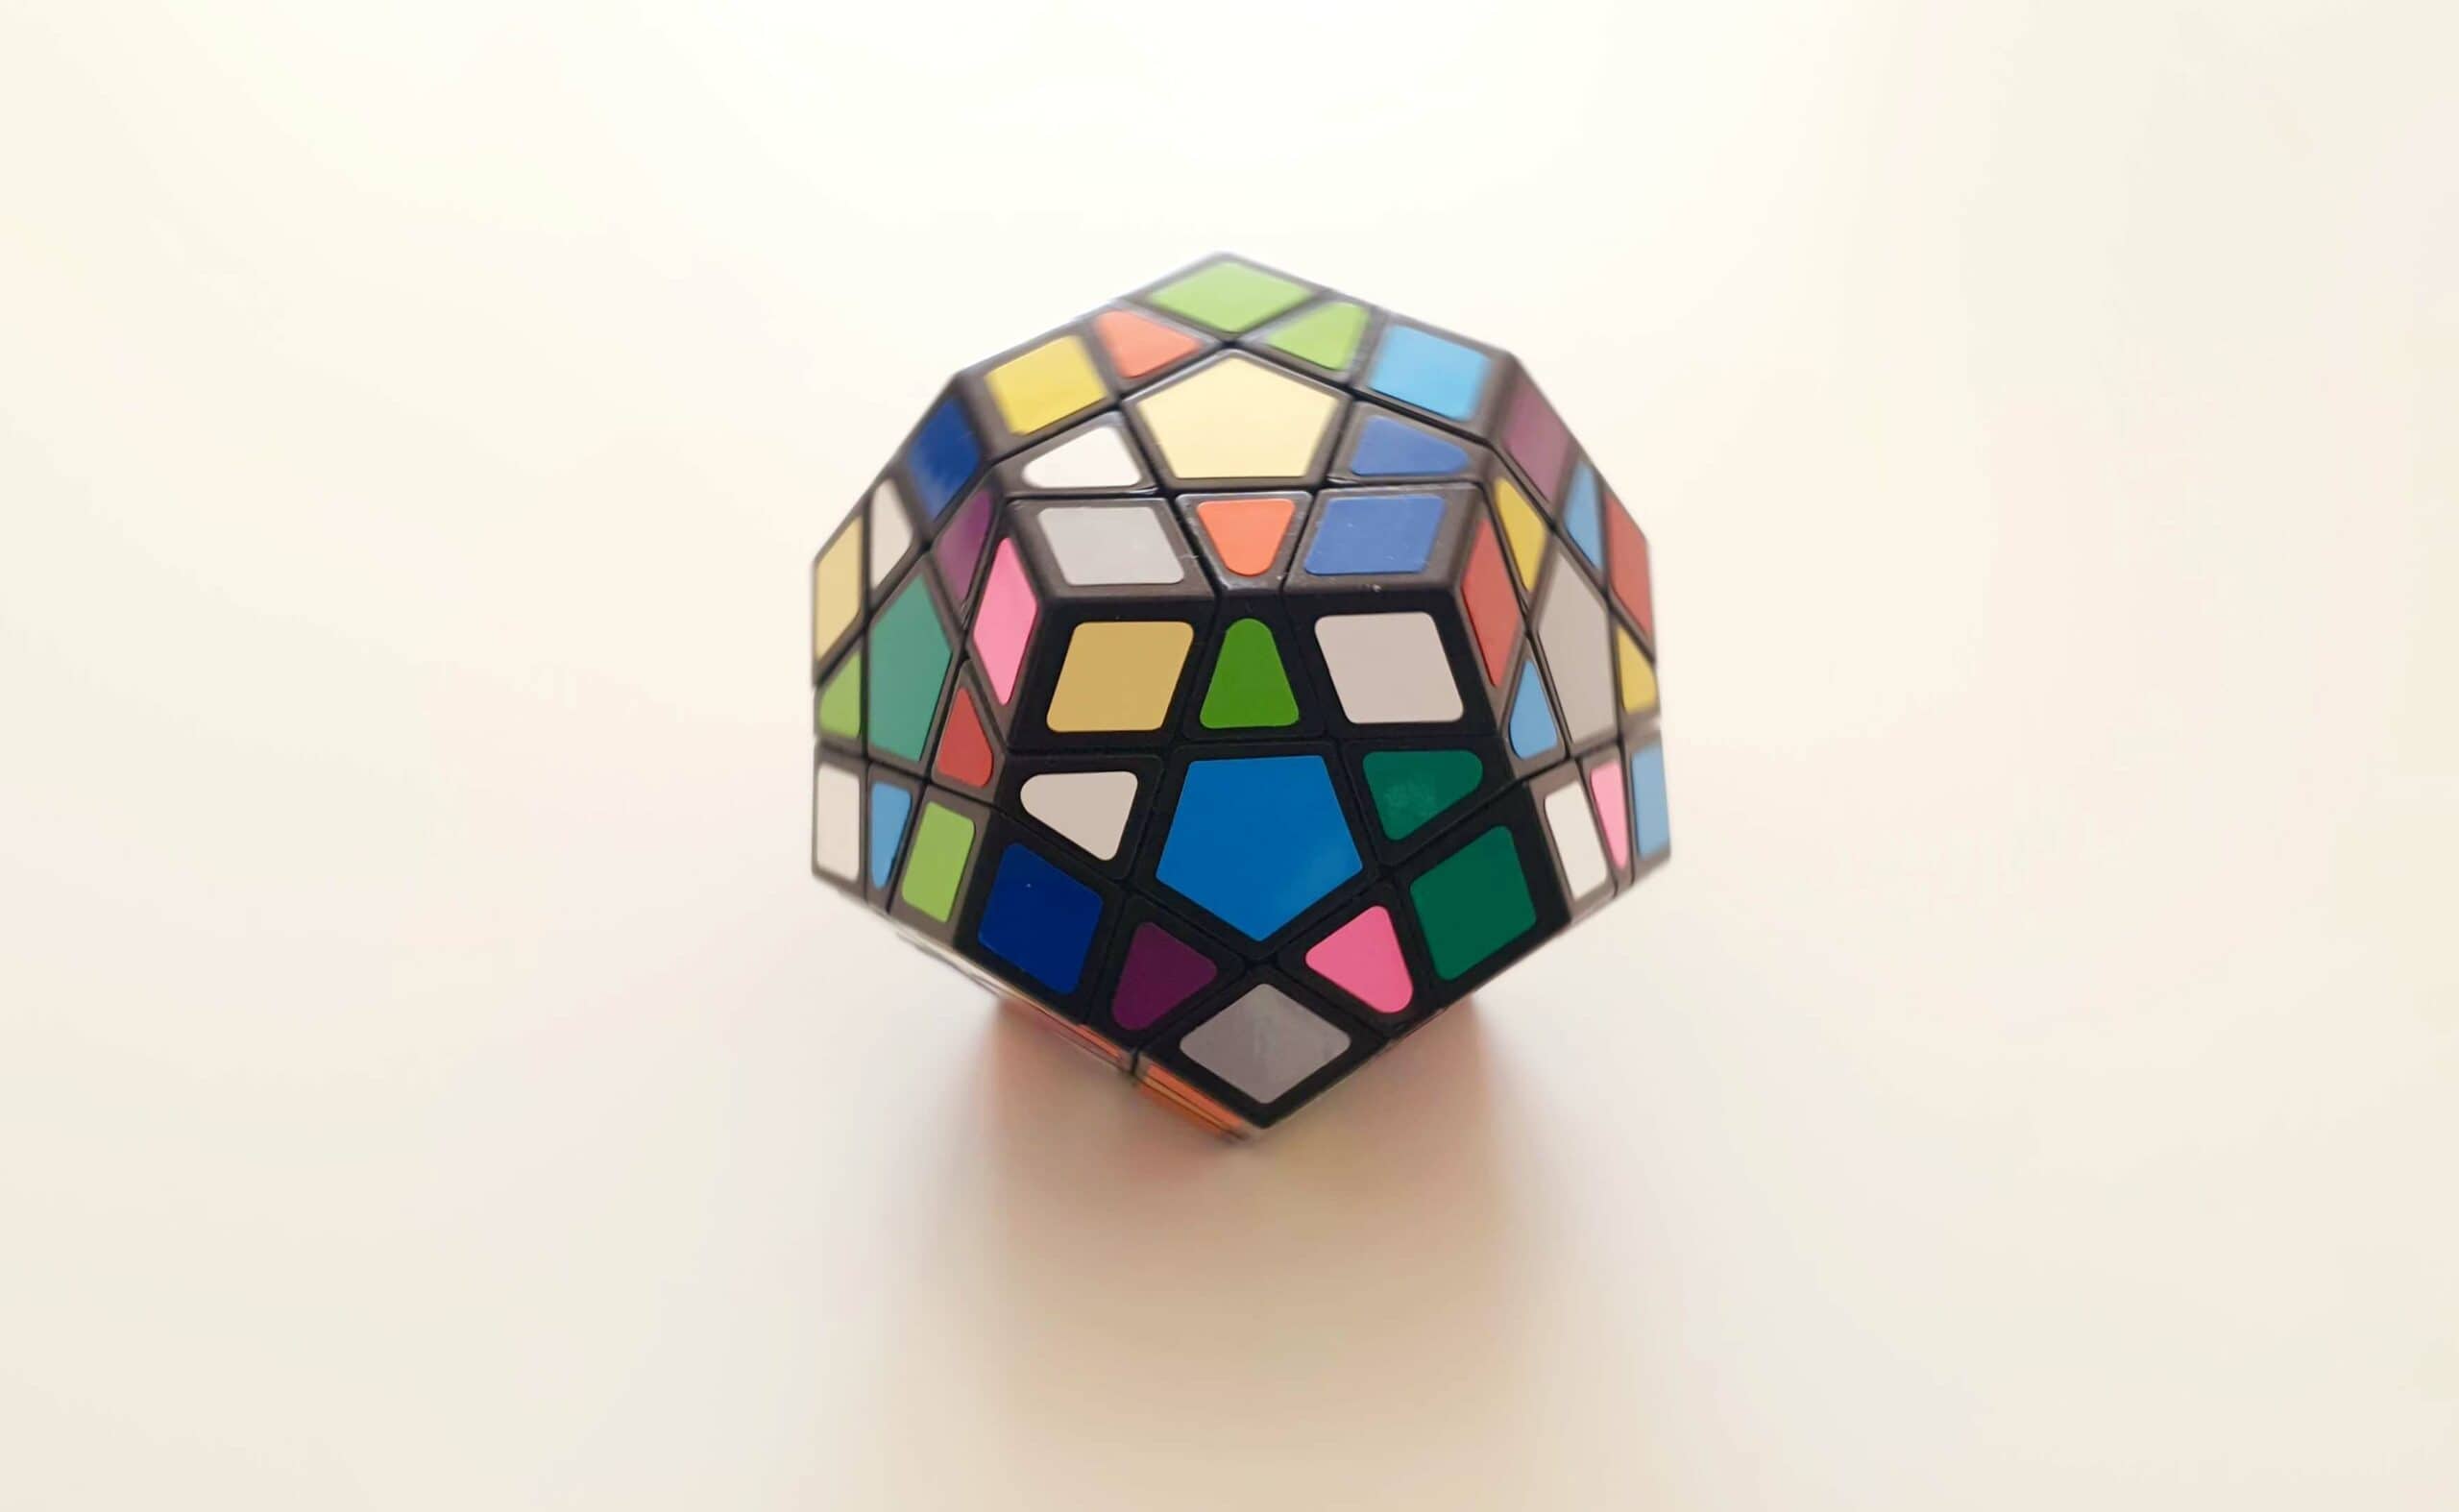 Star Rubic Cube - Different from the standard